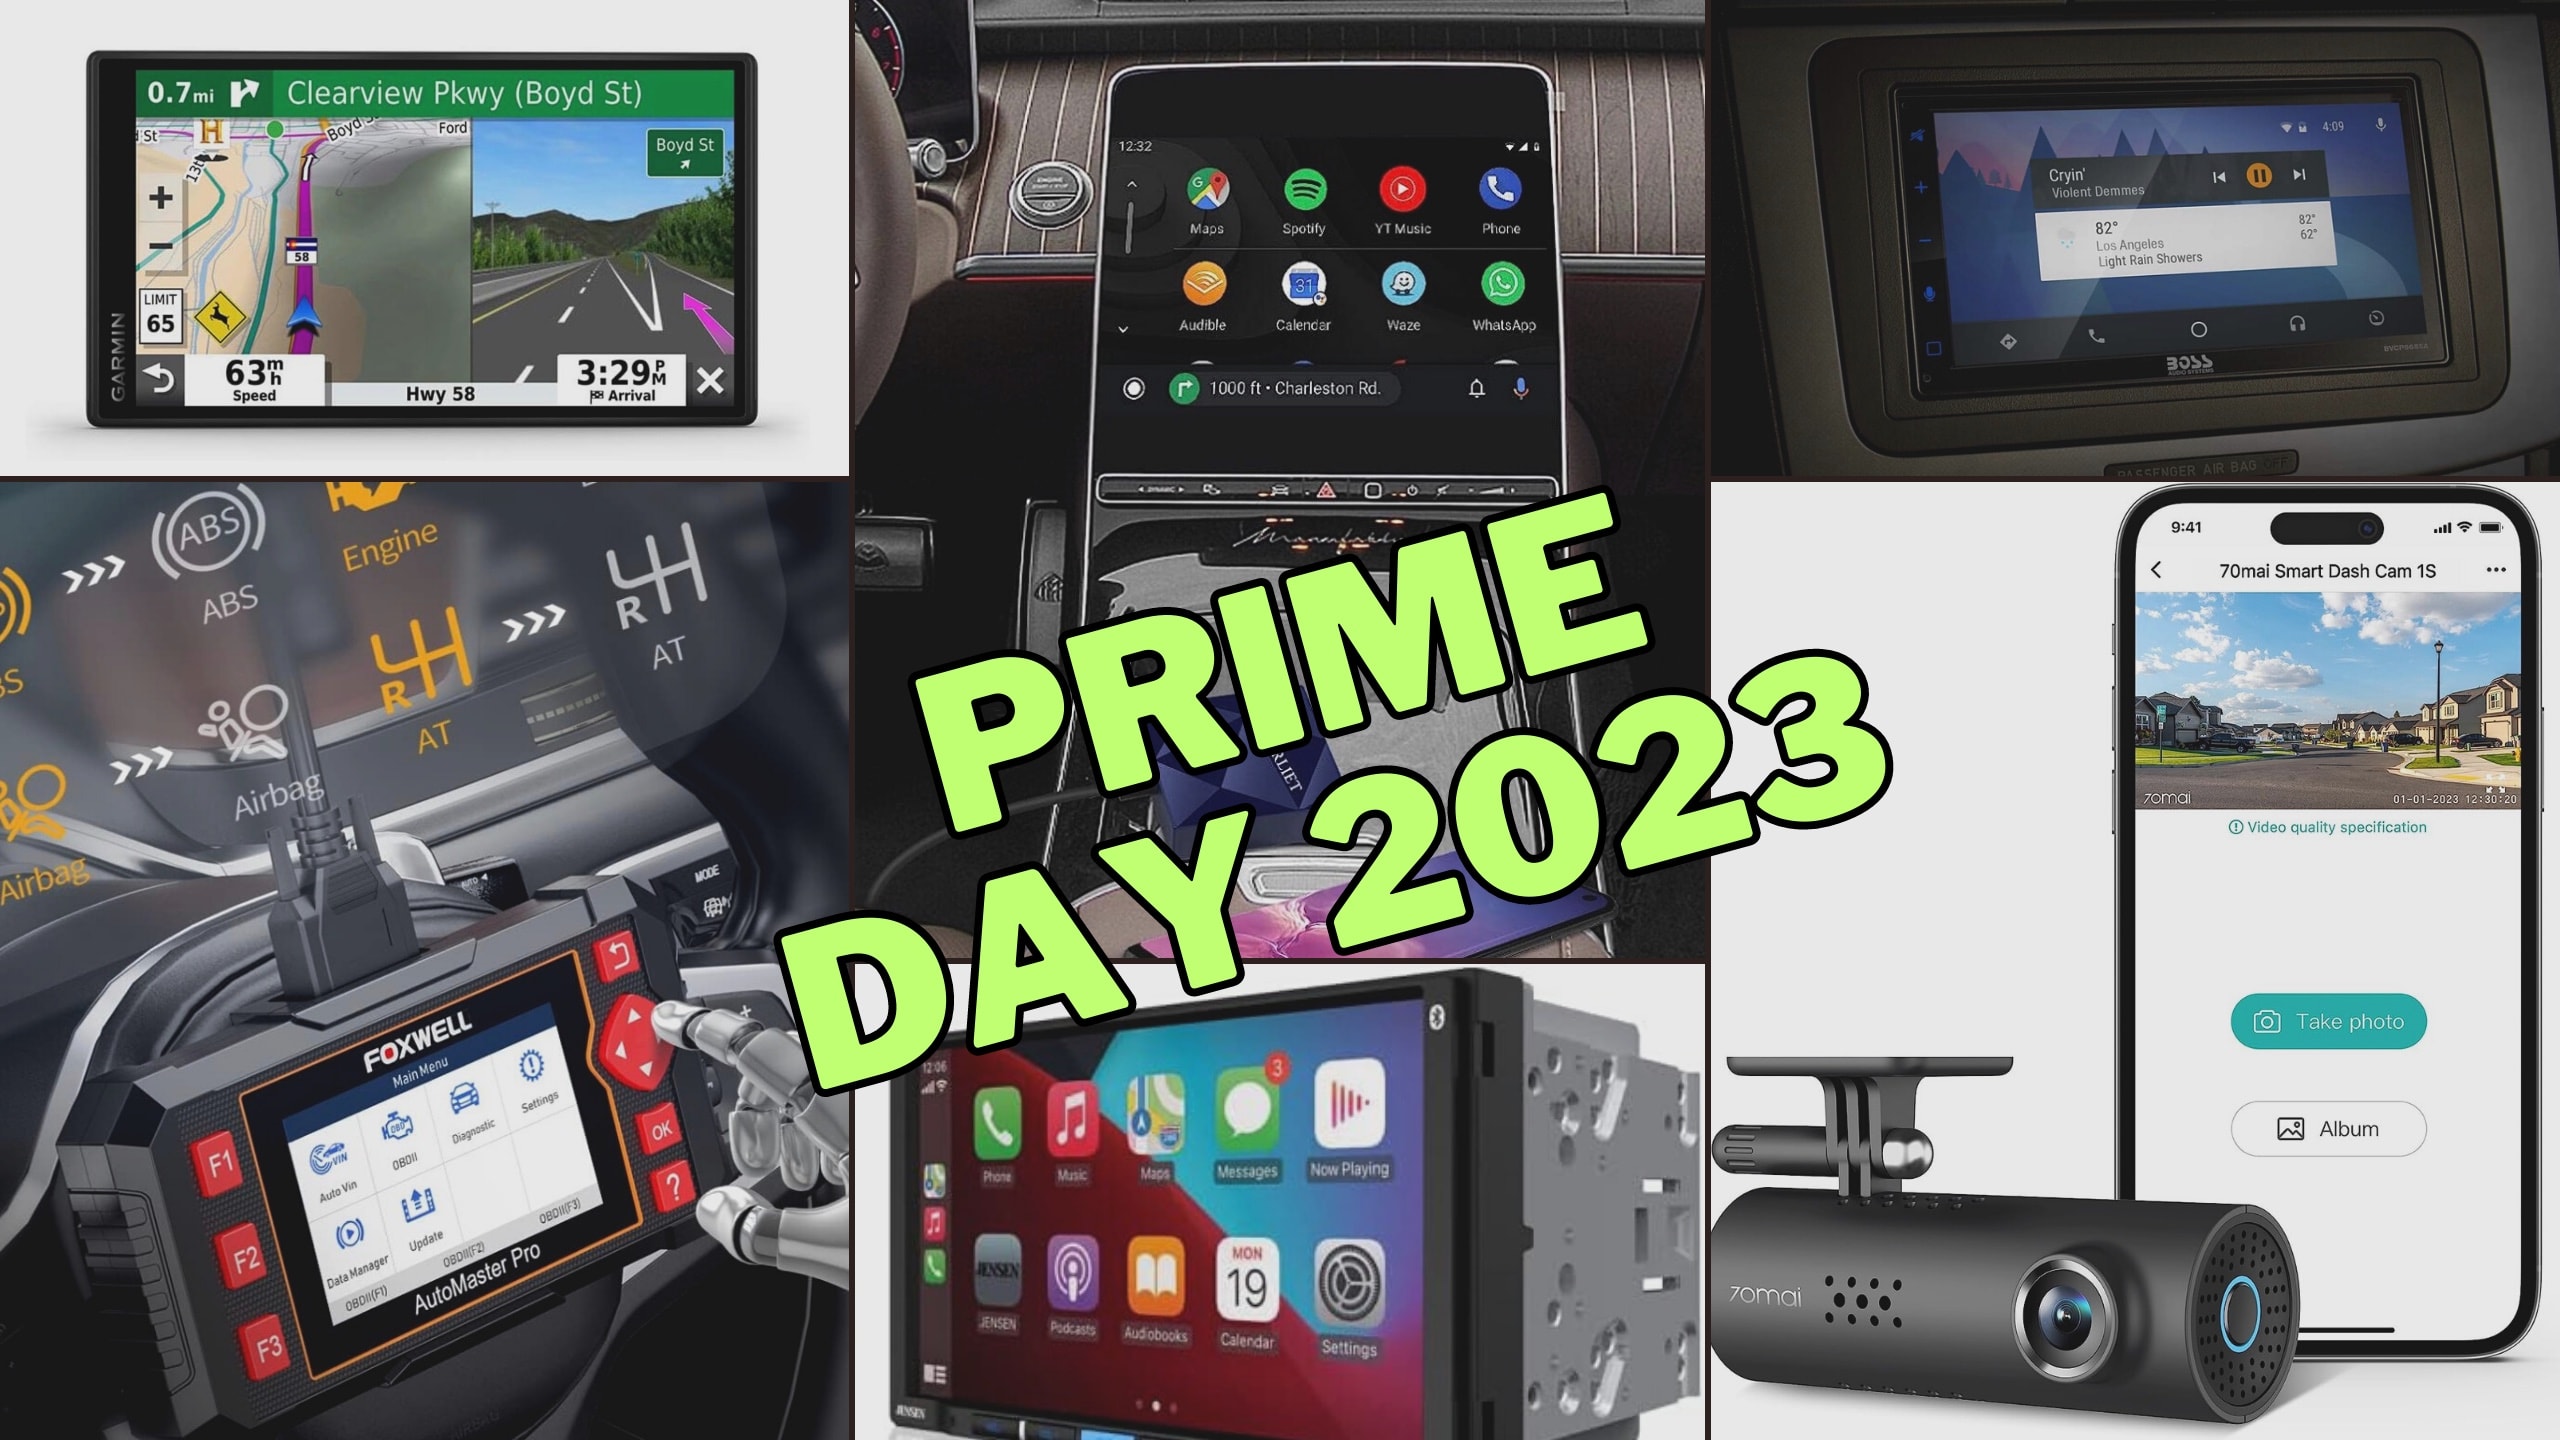 https://s1.cdn.autoevolution.com/images/news/prime-day-2023-best-deals-for-android-auto-adapters-dash-cams-gps-navigators-217883_1.jpg